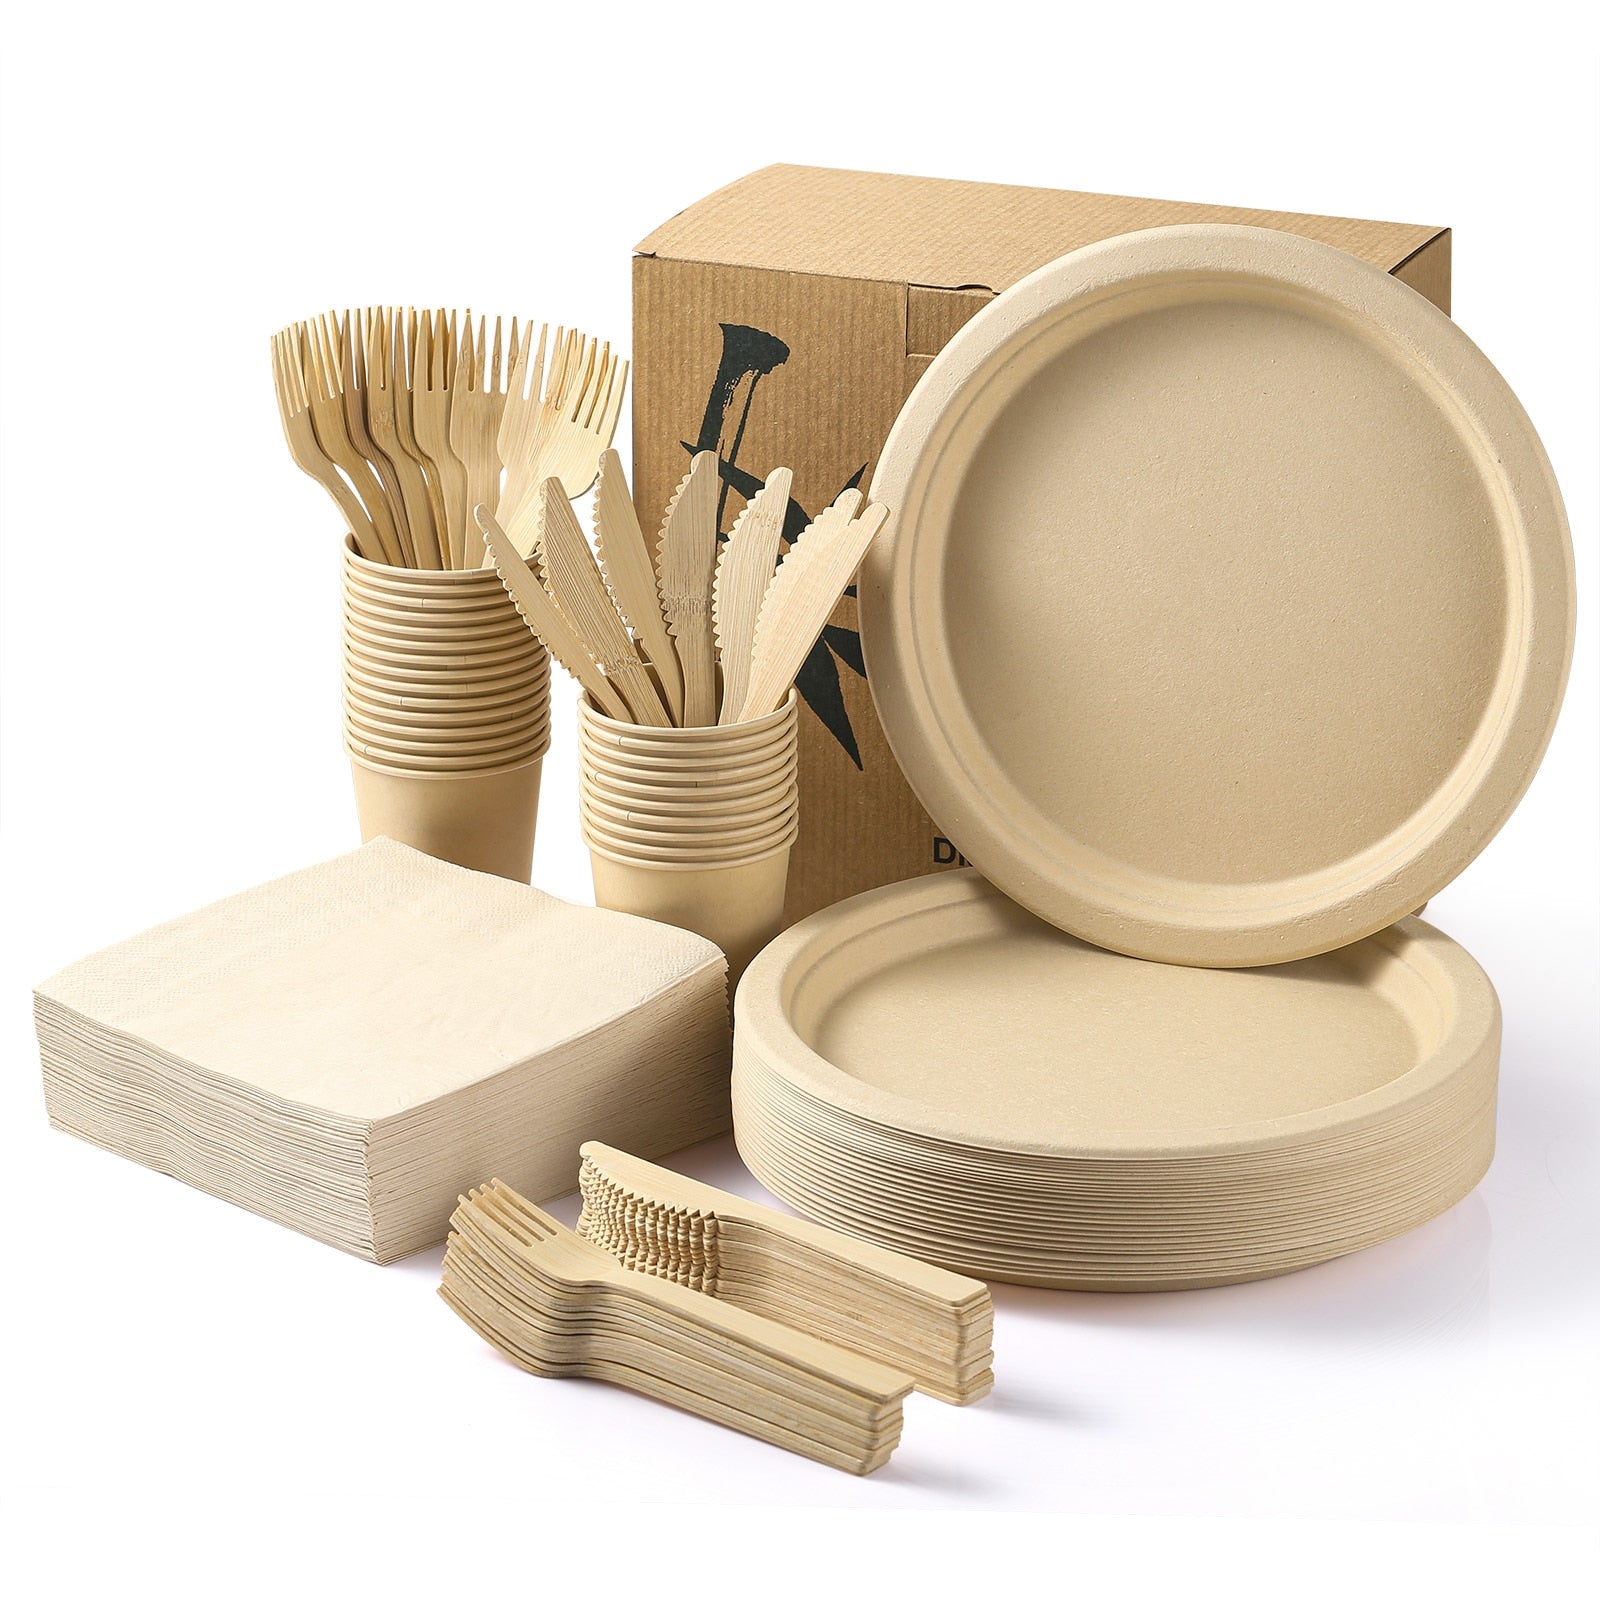 Disposable Tableware Set - Plastic-Free Bamboo Cutlery, Plates, Cups and Napkins